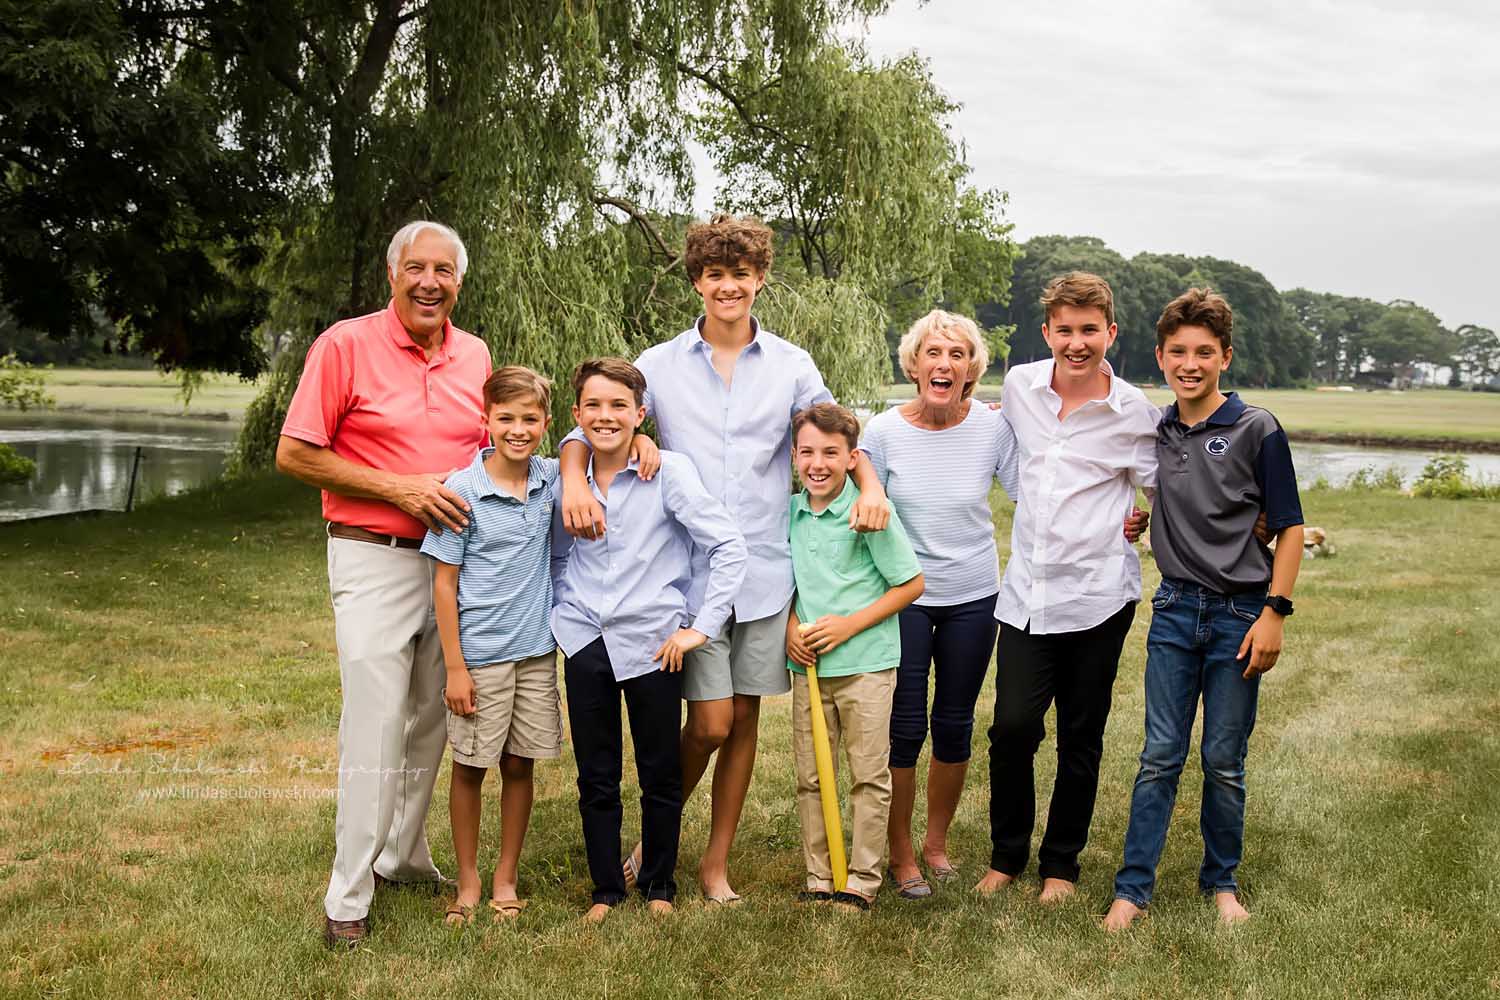 six grandsons and their grandparents at a family reunion photo shoot, CT Family photographer